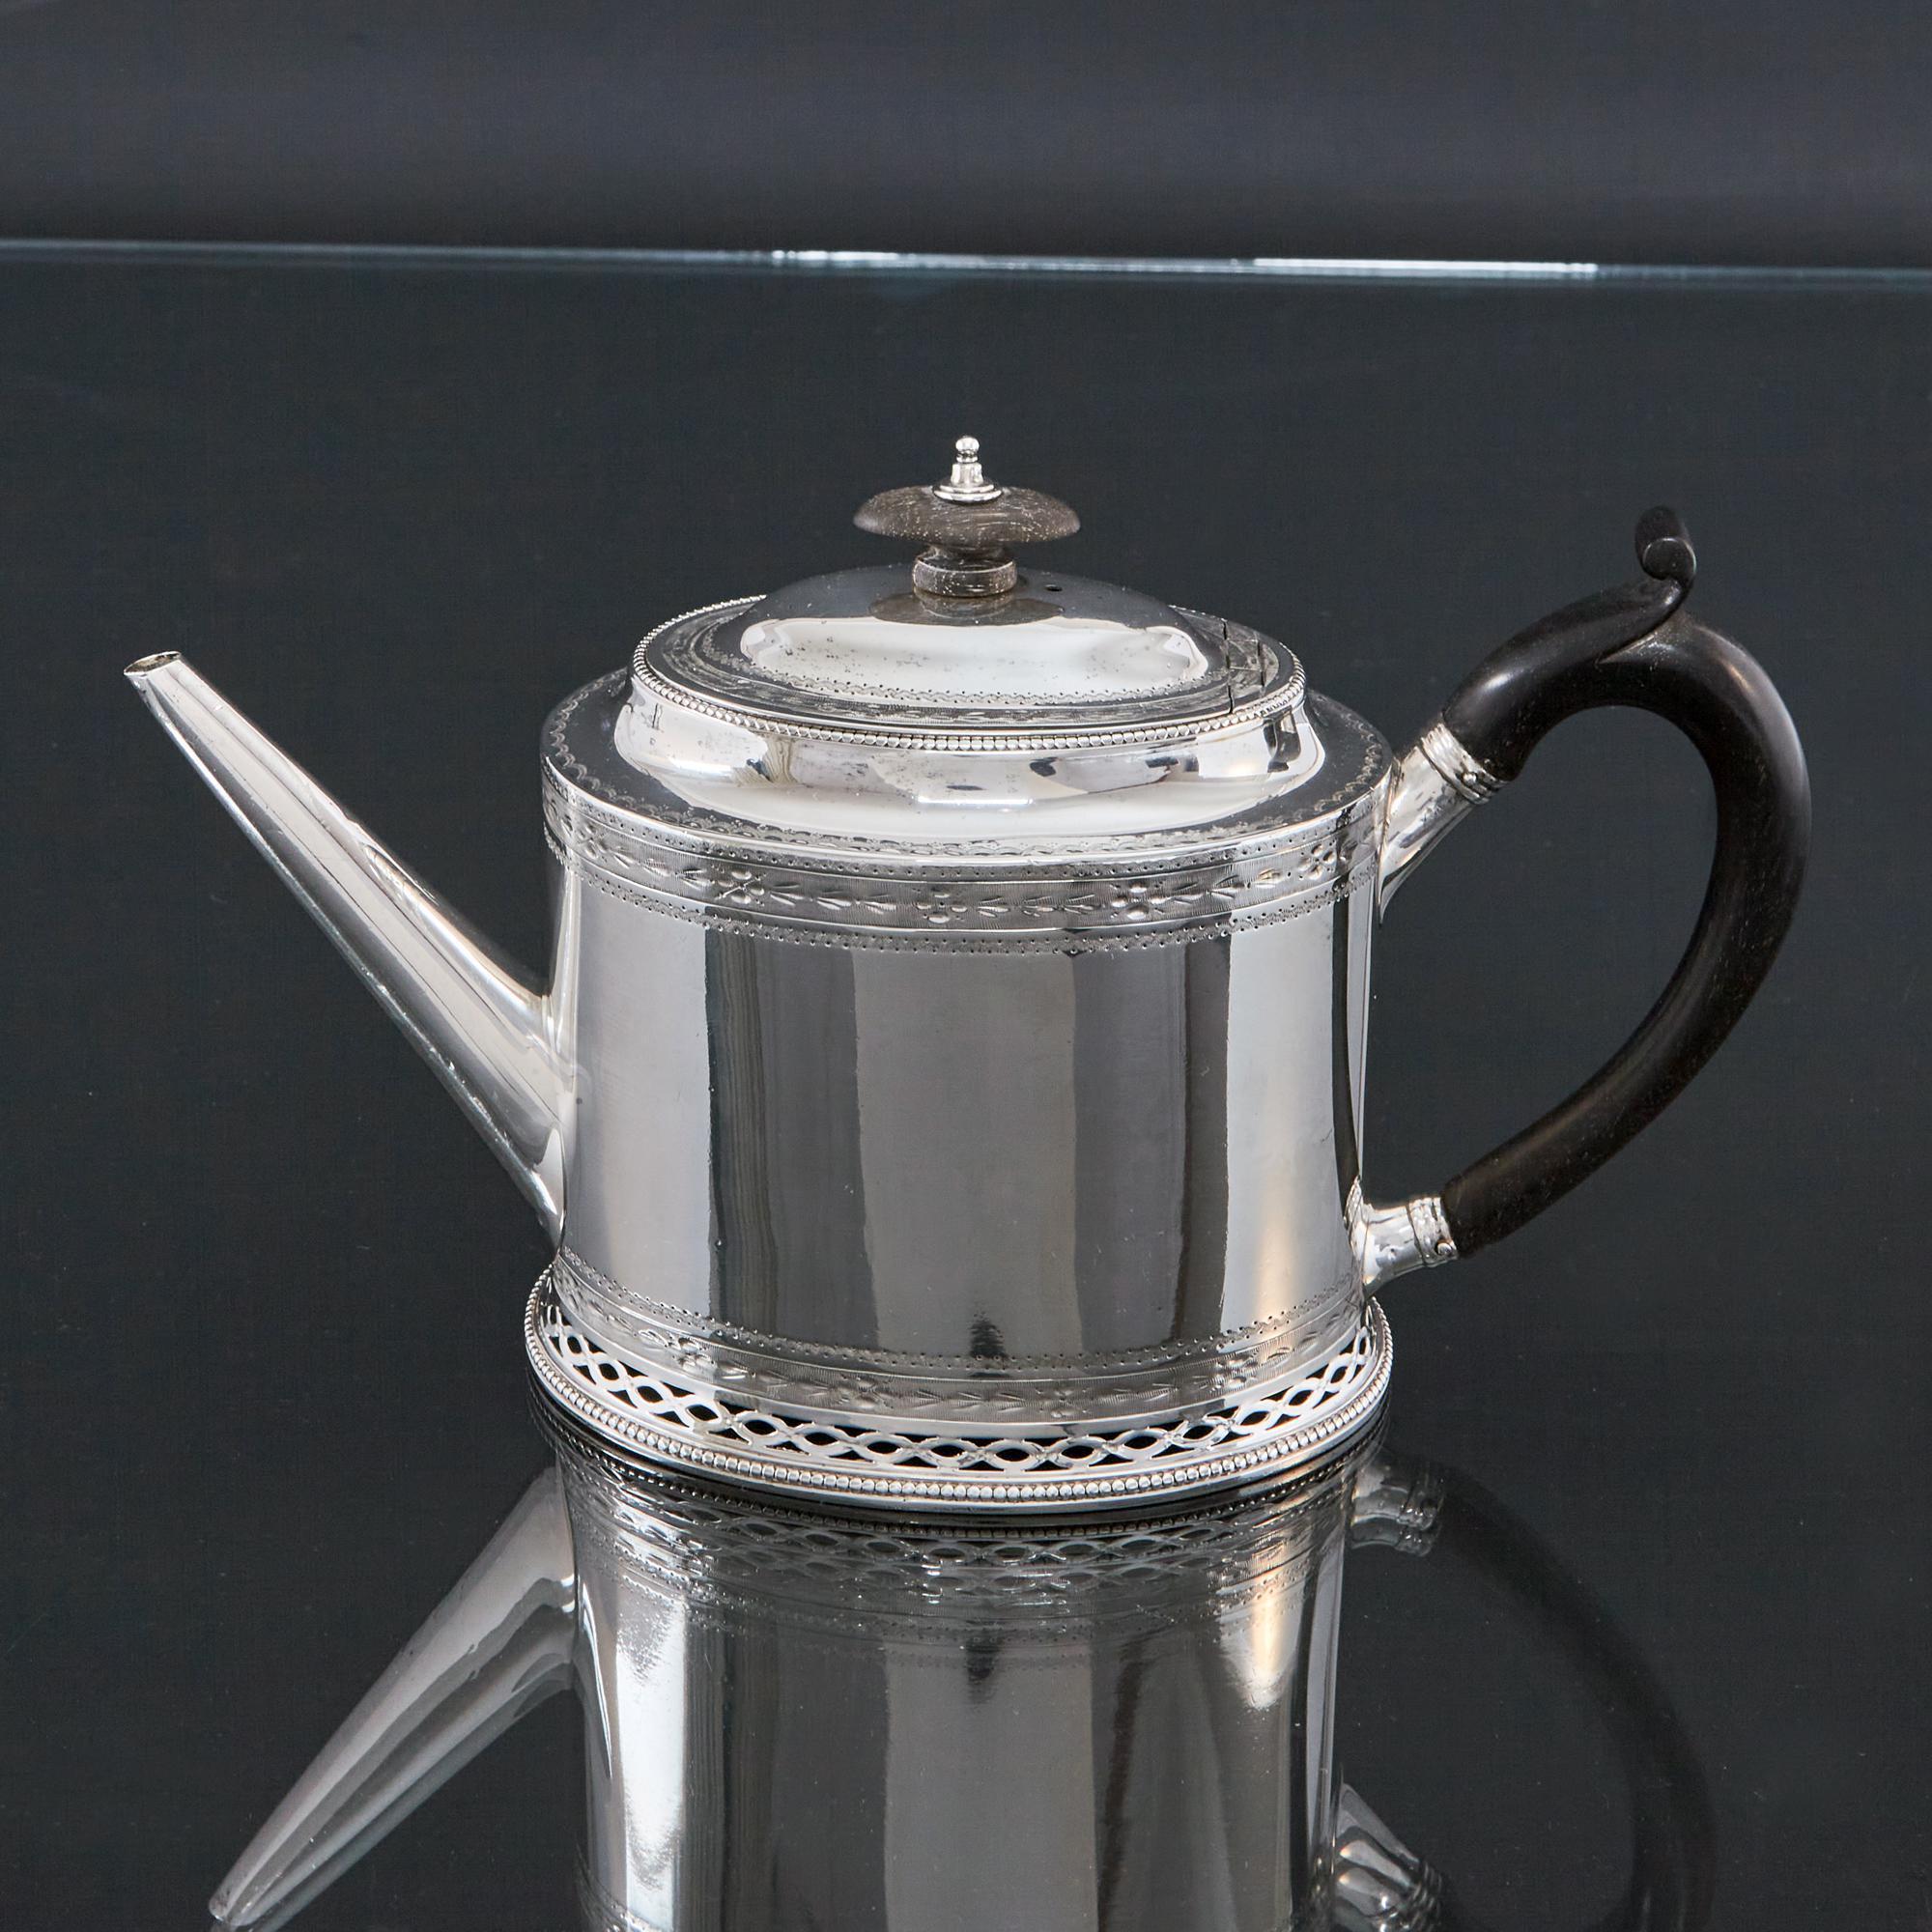 Beautiful and elegant neoclassical style antique silver teapot by the premier female silversmith, Hester Bateman. This 18th century silver teapot is engraved with some of neoclassical motifs of the period - floral swags, ribbons and bellflower